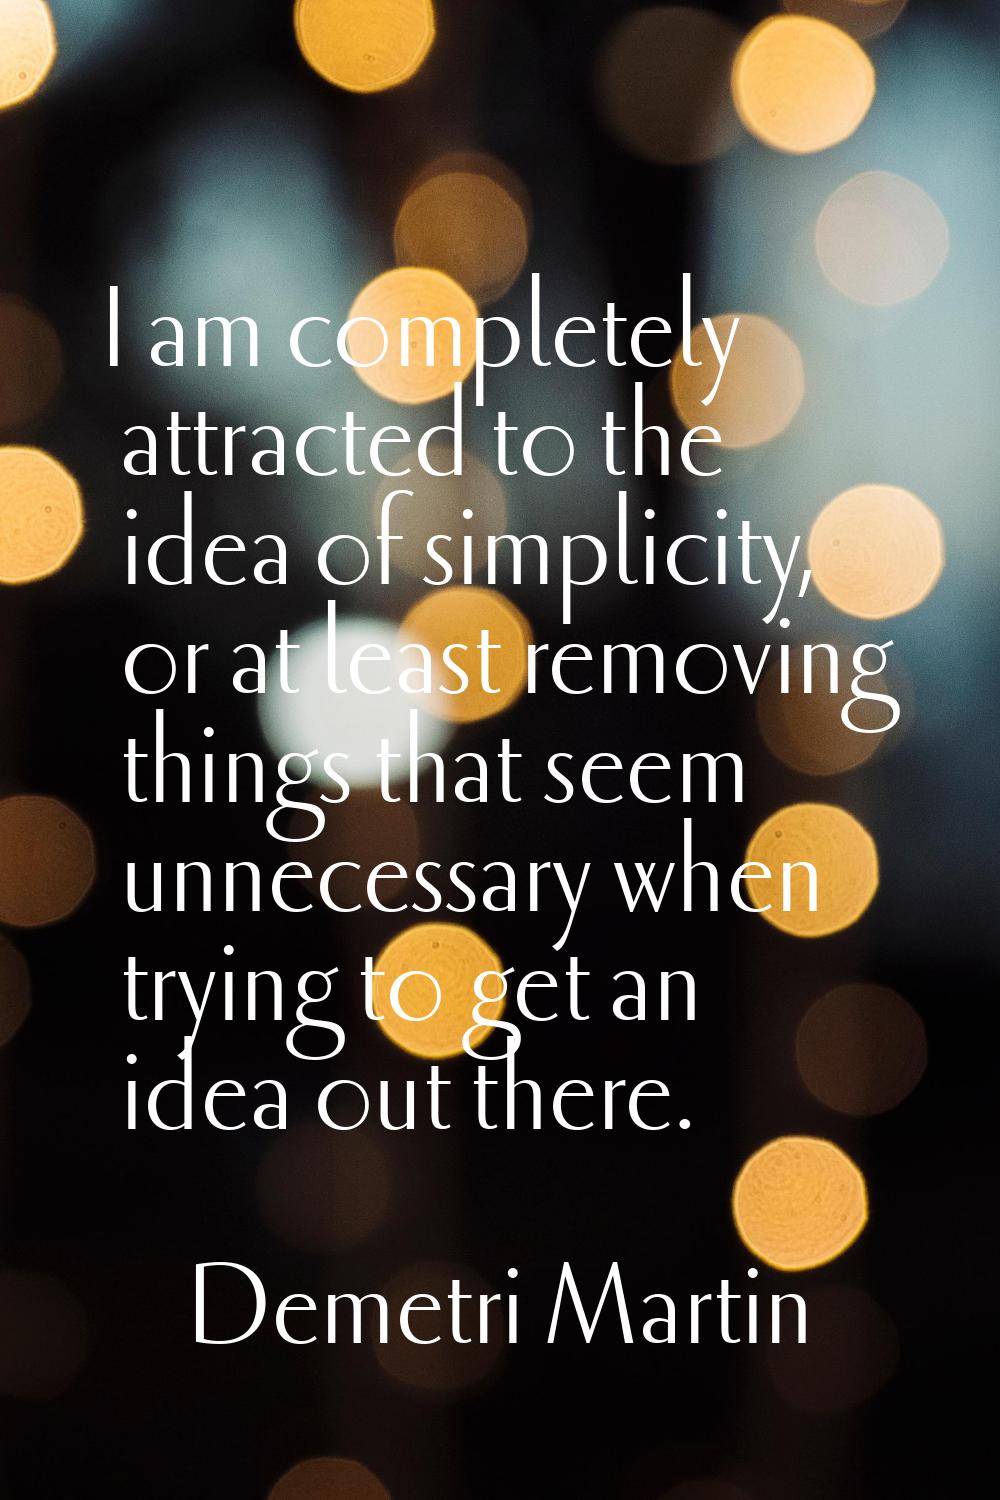 I am completely attracted to the idea of simplicity, or at least removing things that seem unnecess